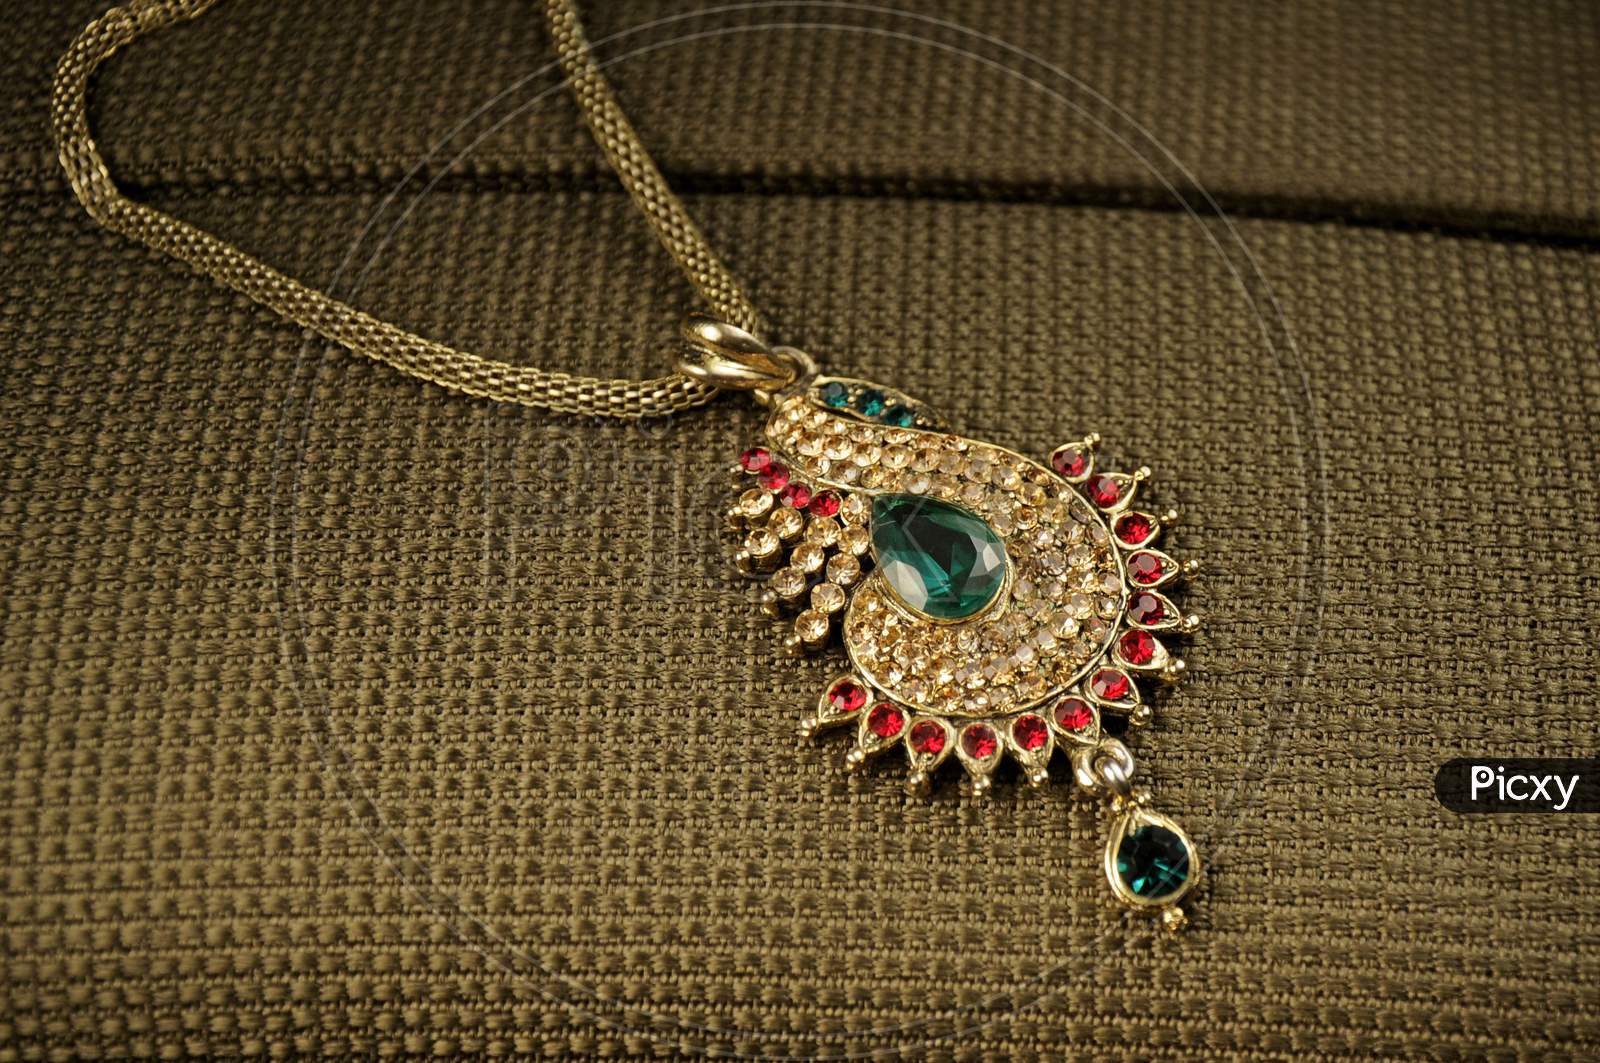 Diamond Pendant With Chain, Indian Traditional Jewelry